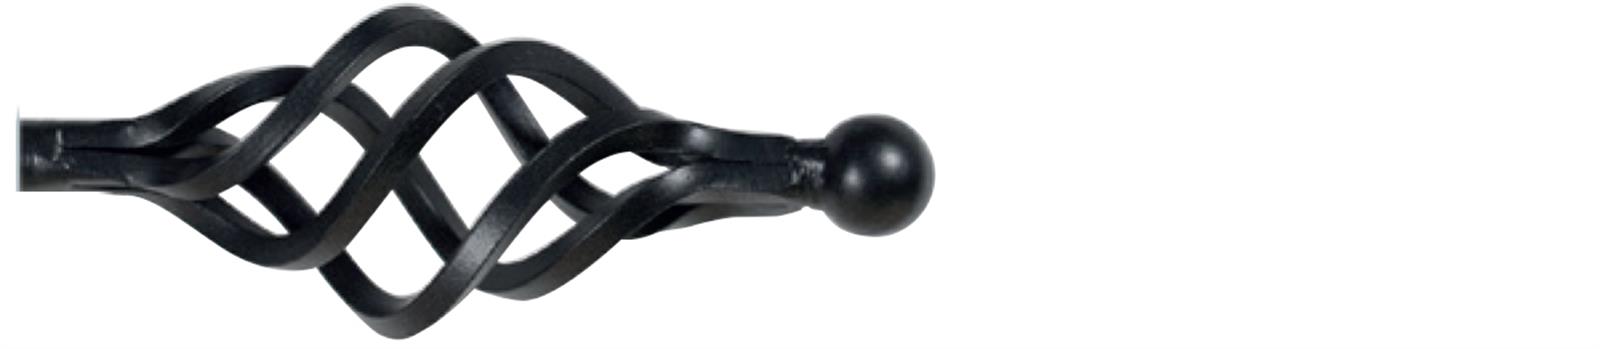 Cameron Fuller 19mm Metal Curtain Pole Black Cage